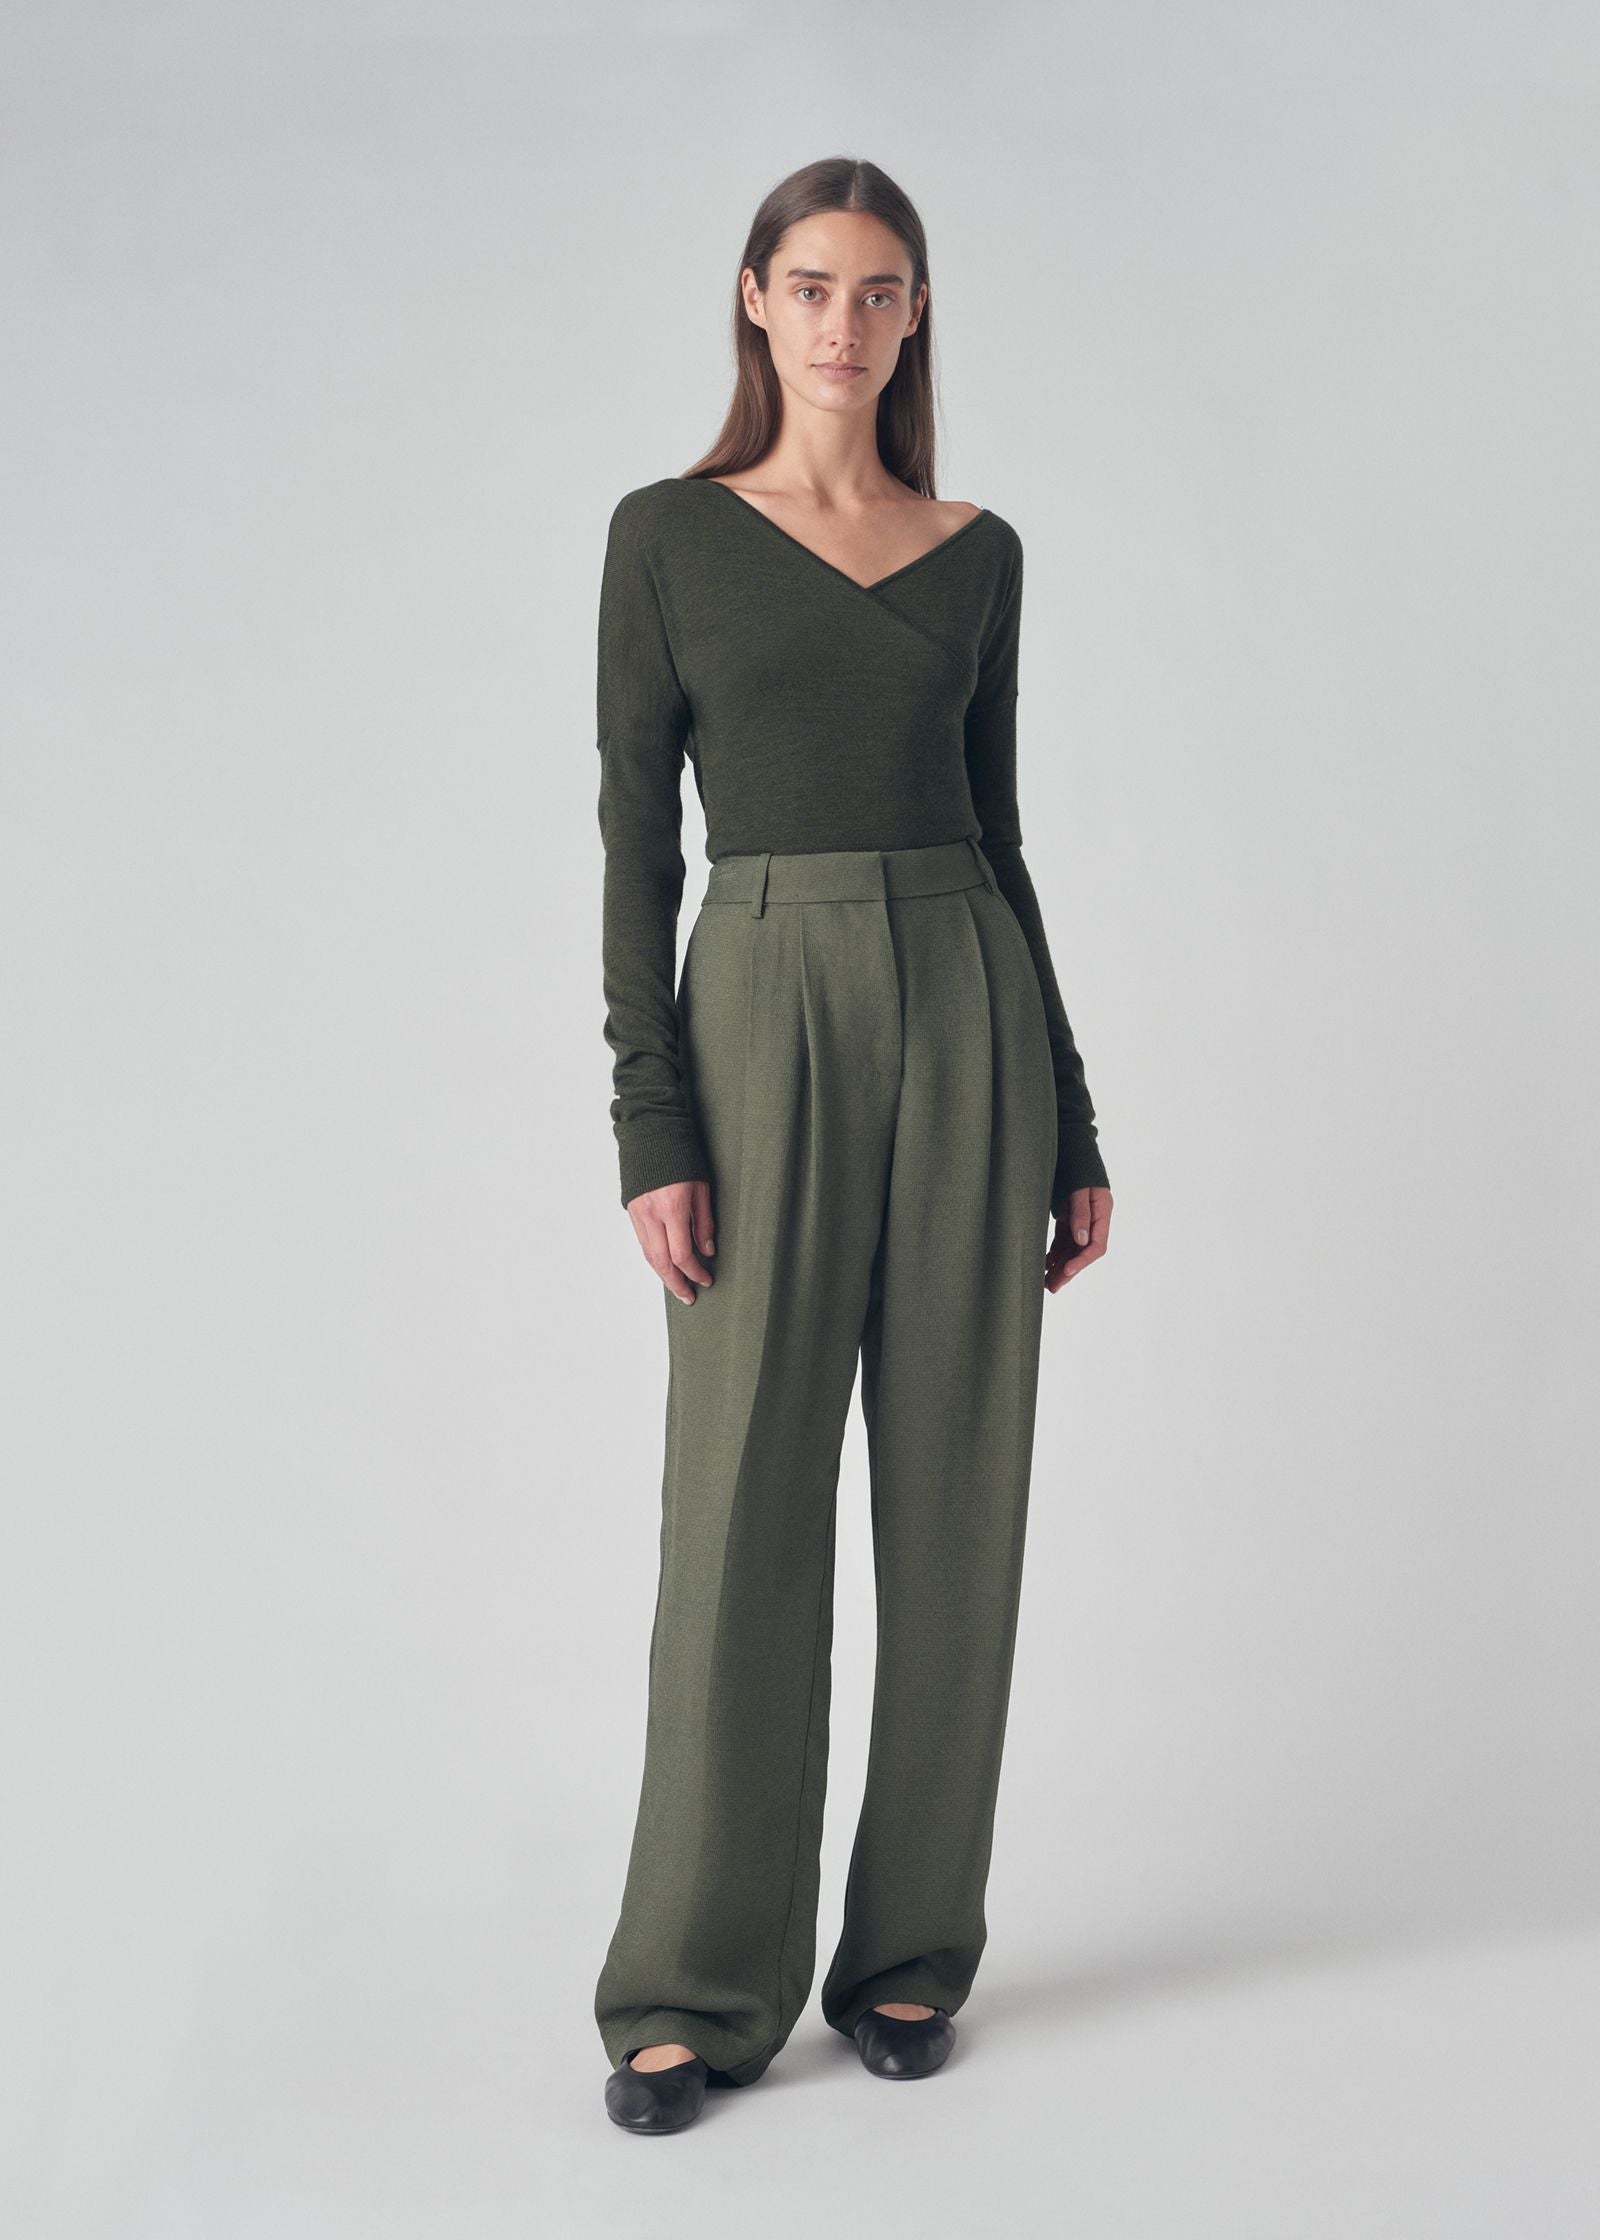 Ballet Top in Fine Merino Wool Knit- Green - CO Collections